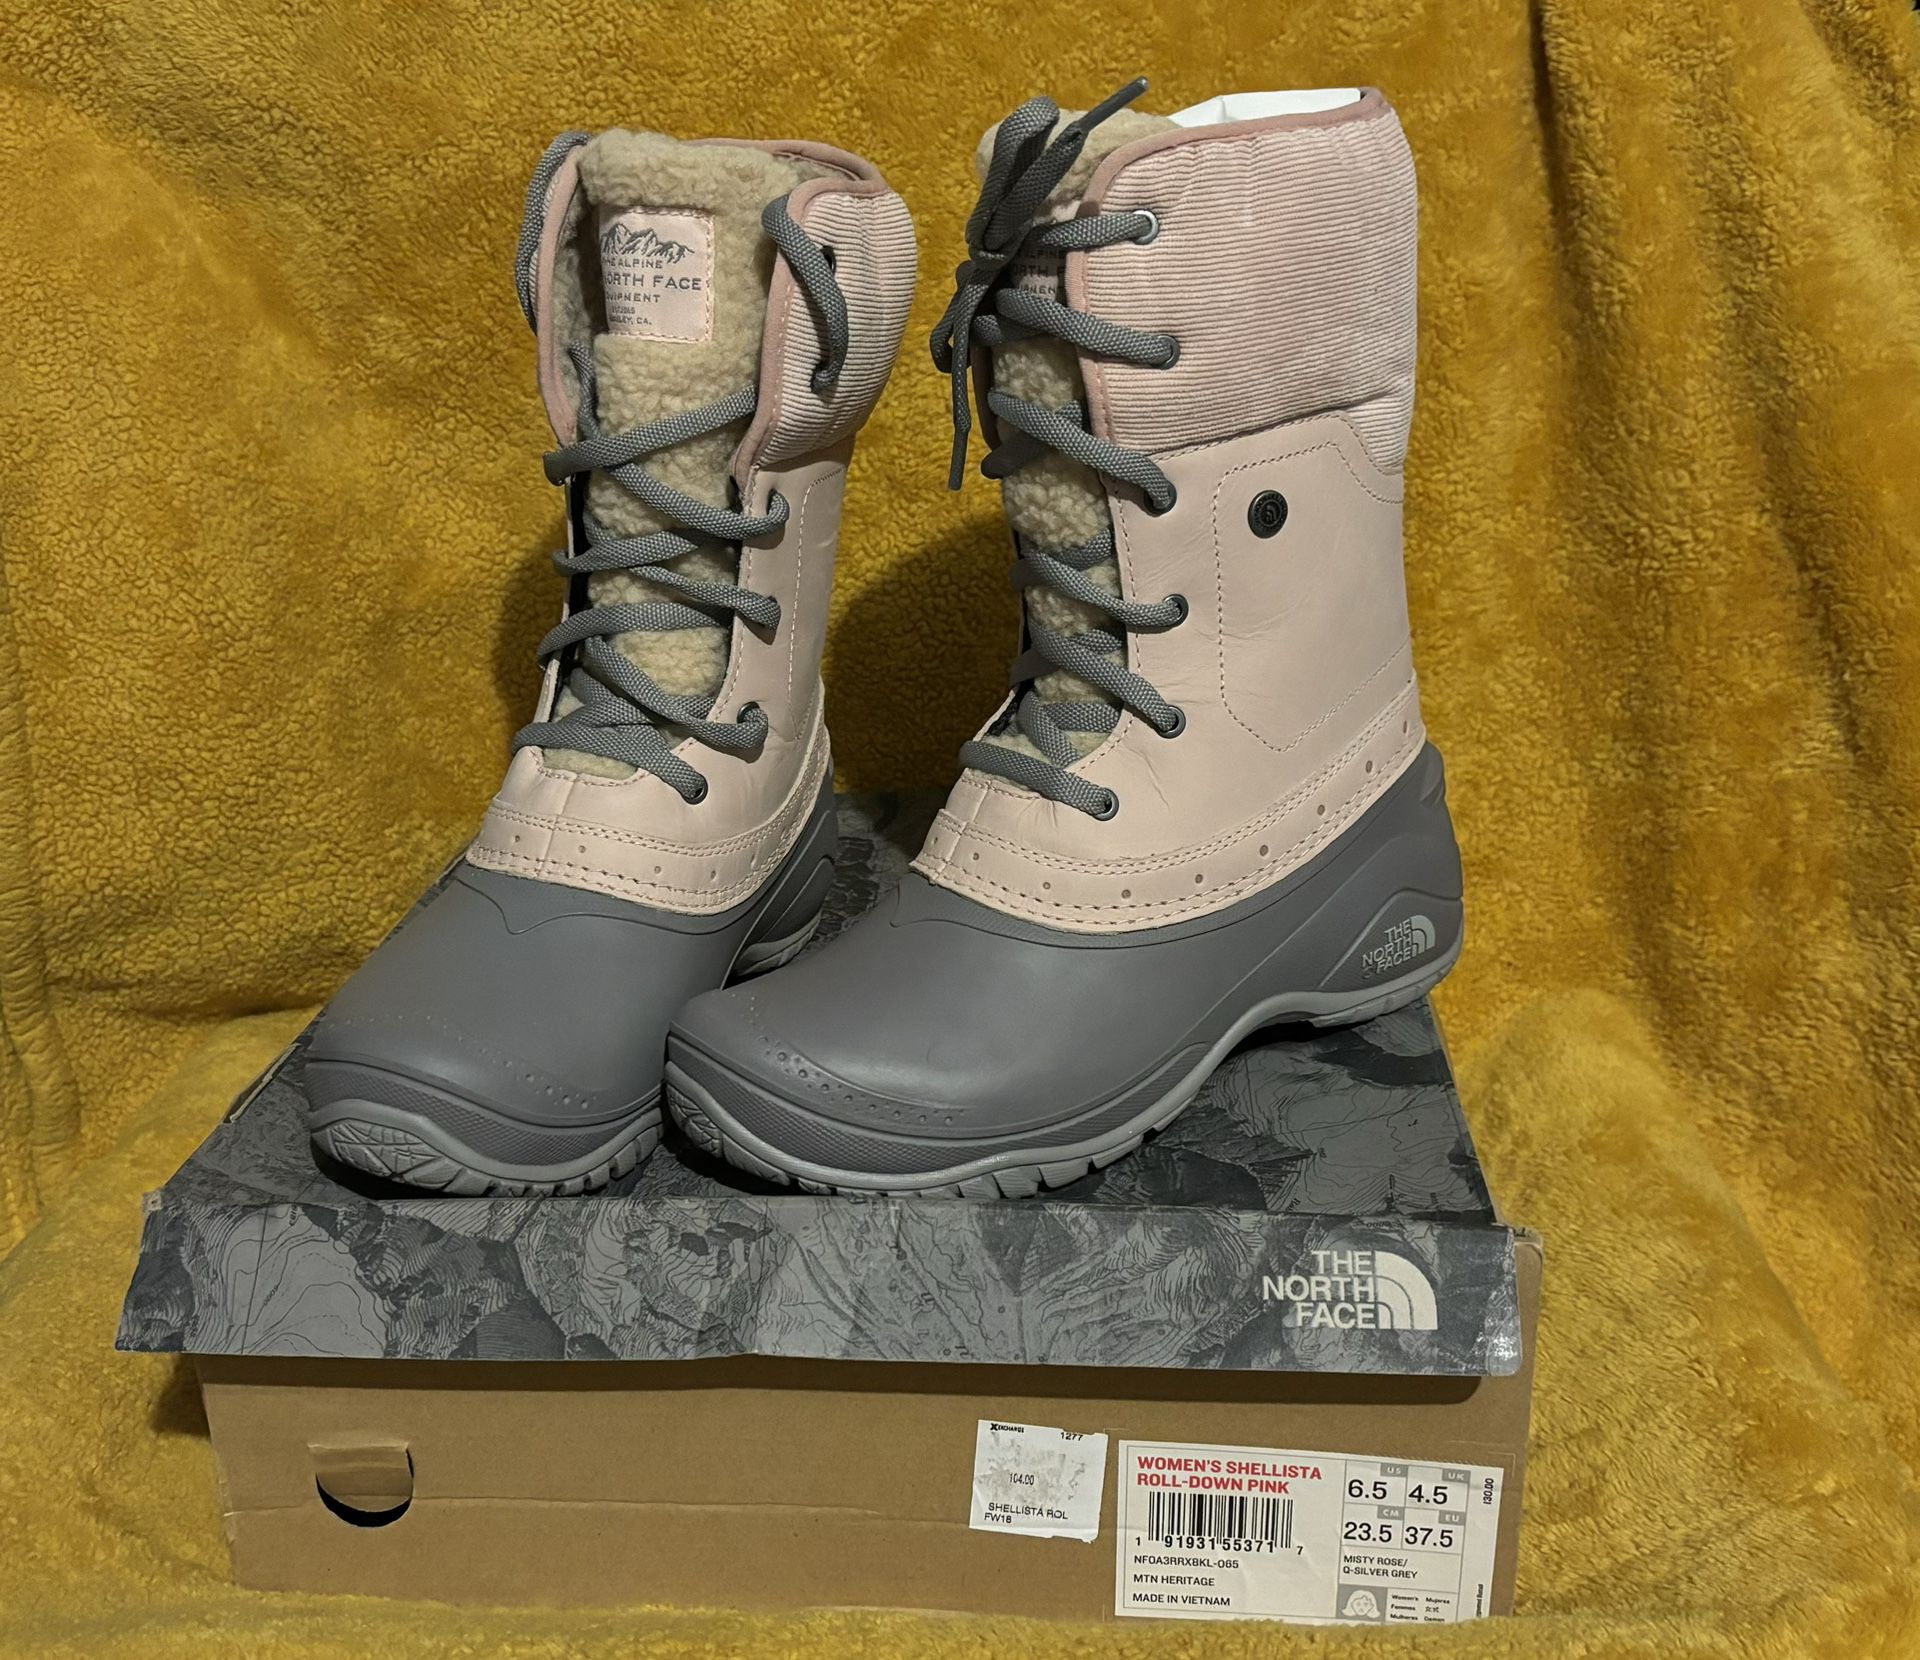 The North Face Women's Brown Shellista Roll Down Pink Waterproof Insulated Winter Boot